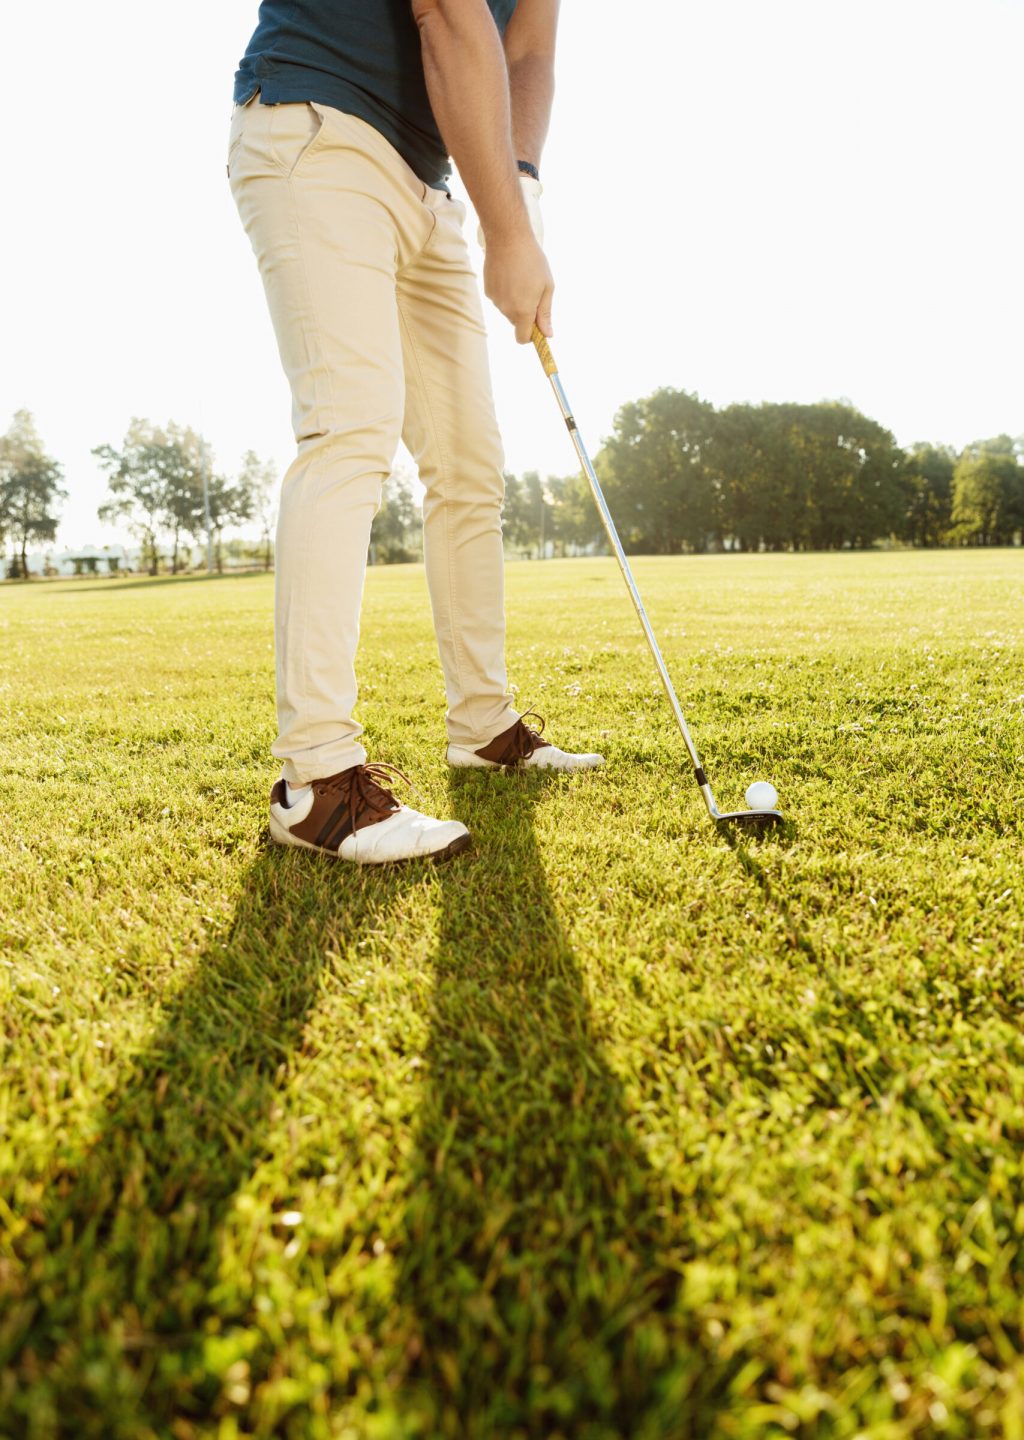 Cropped image of a golfer putting golf ball on green outdoors